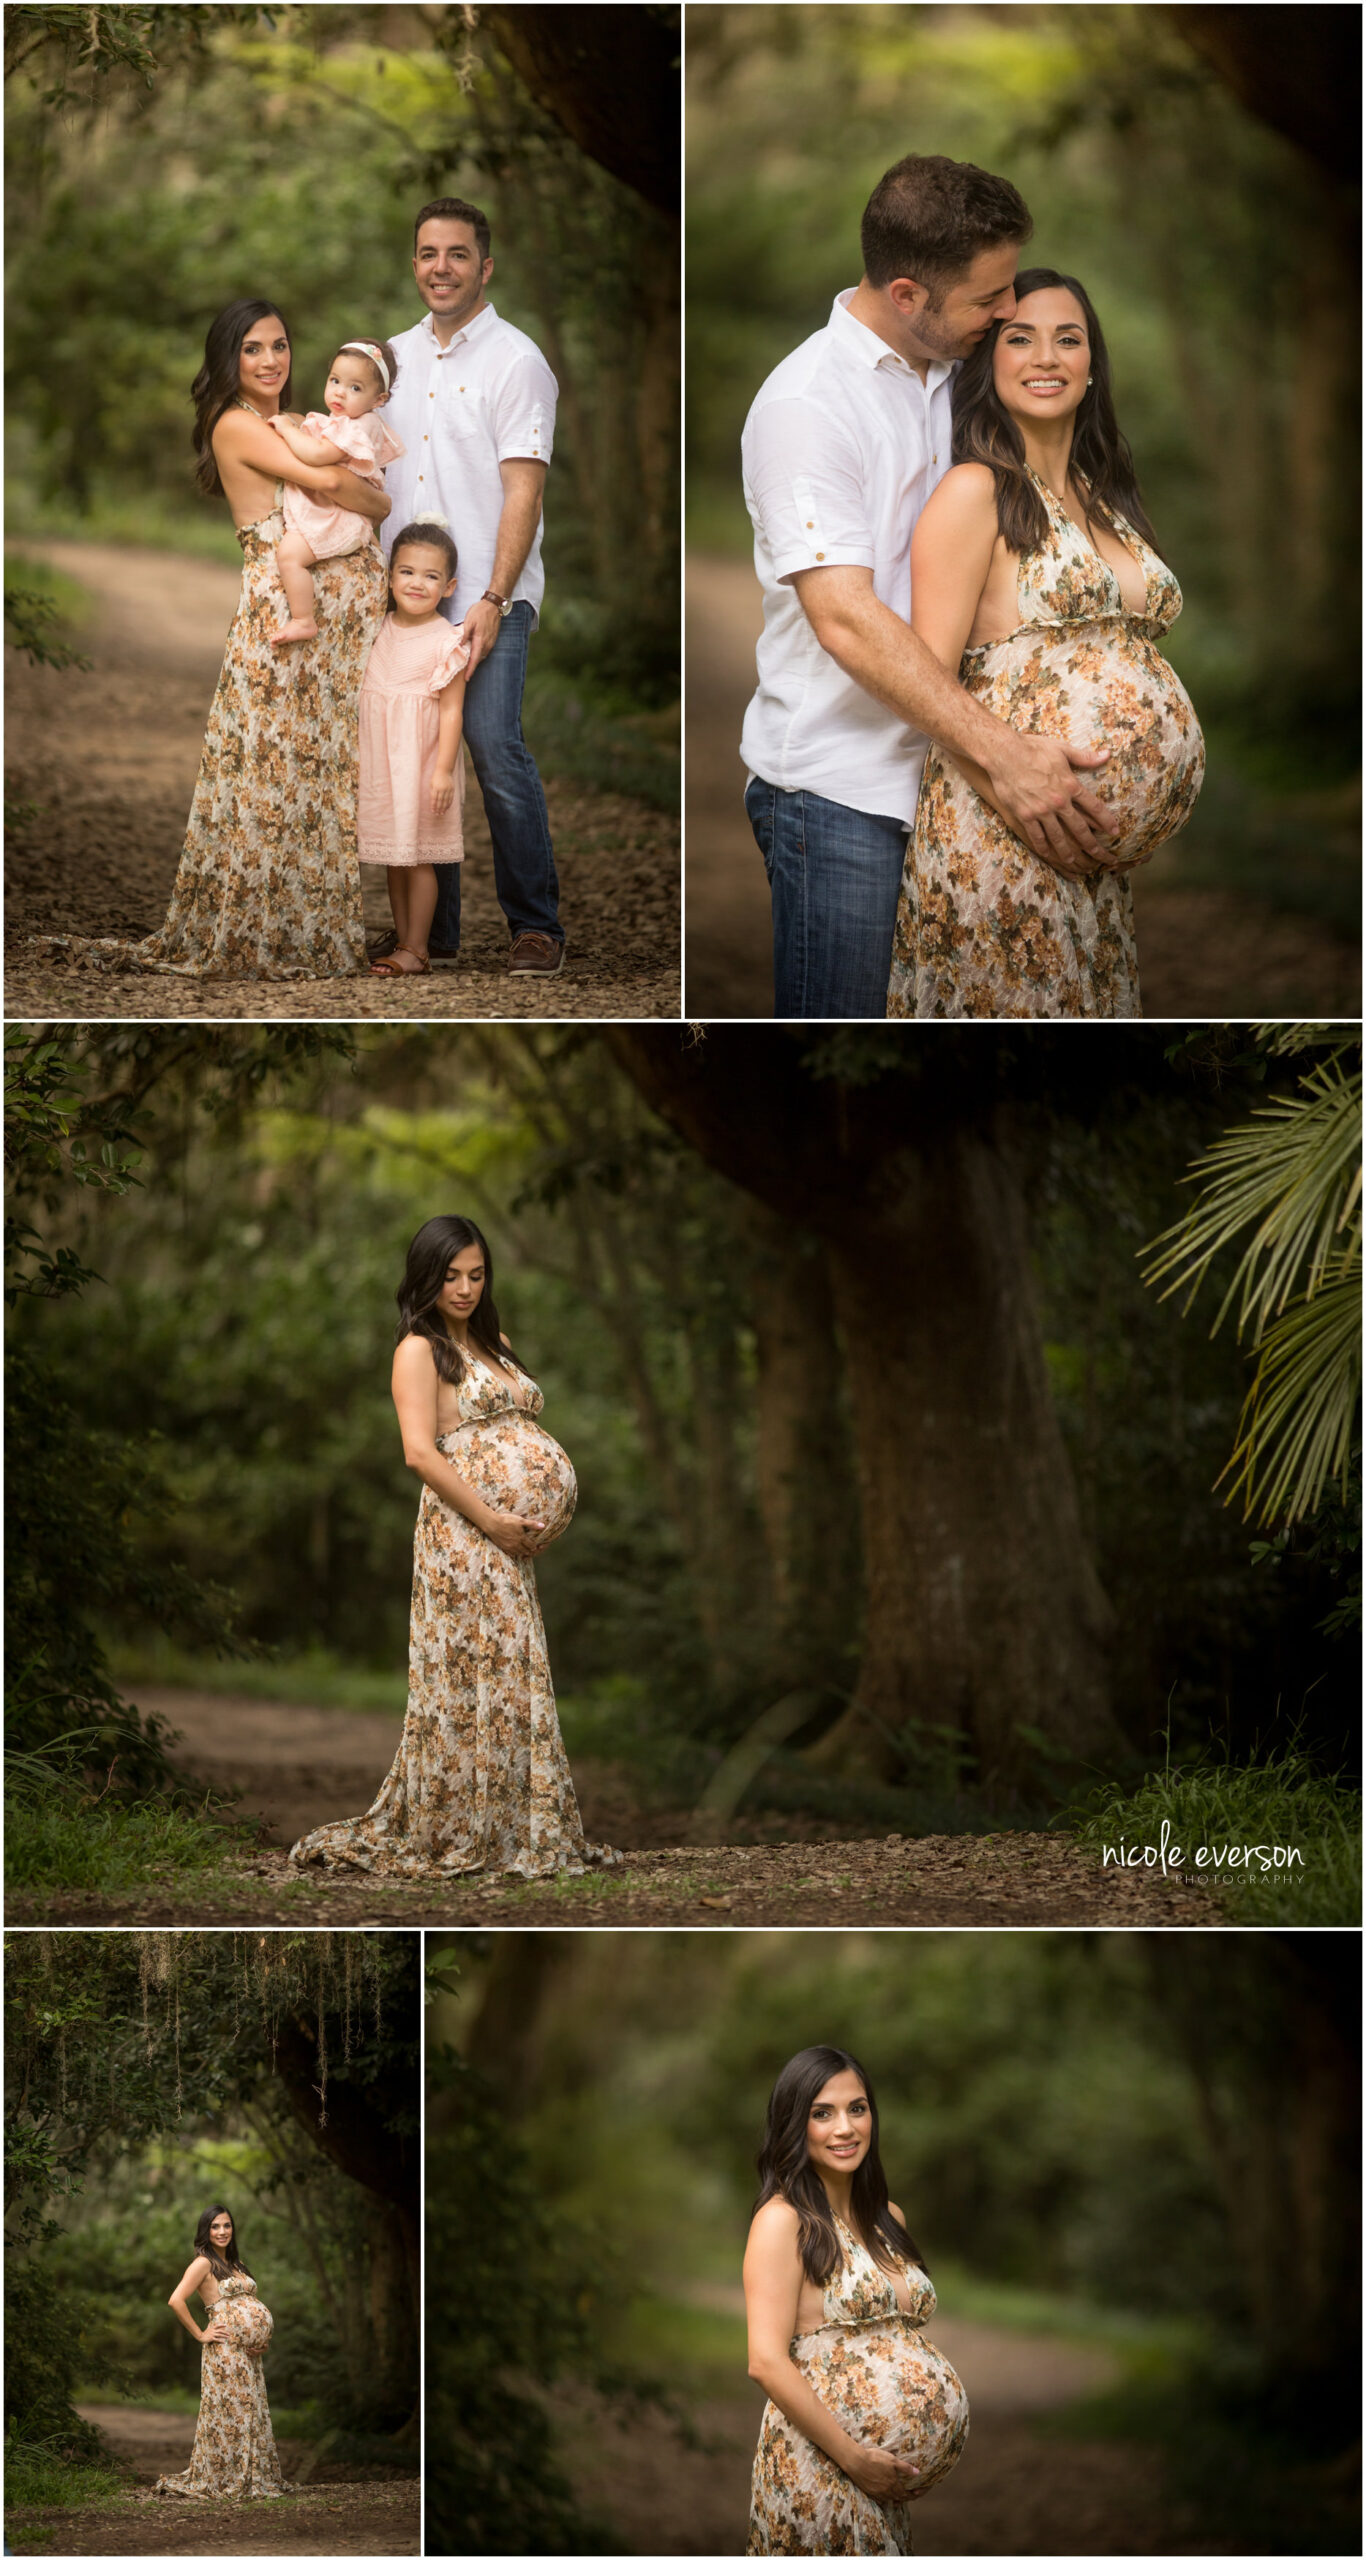 Our Kick-Ass Maternity Photography Session! (And Simple Tips for Your Baby  Bump Photoshoot) - A Reluctant Mom